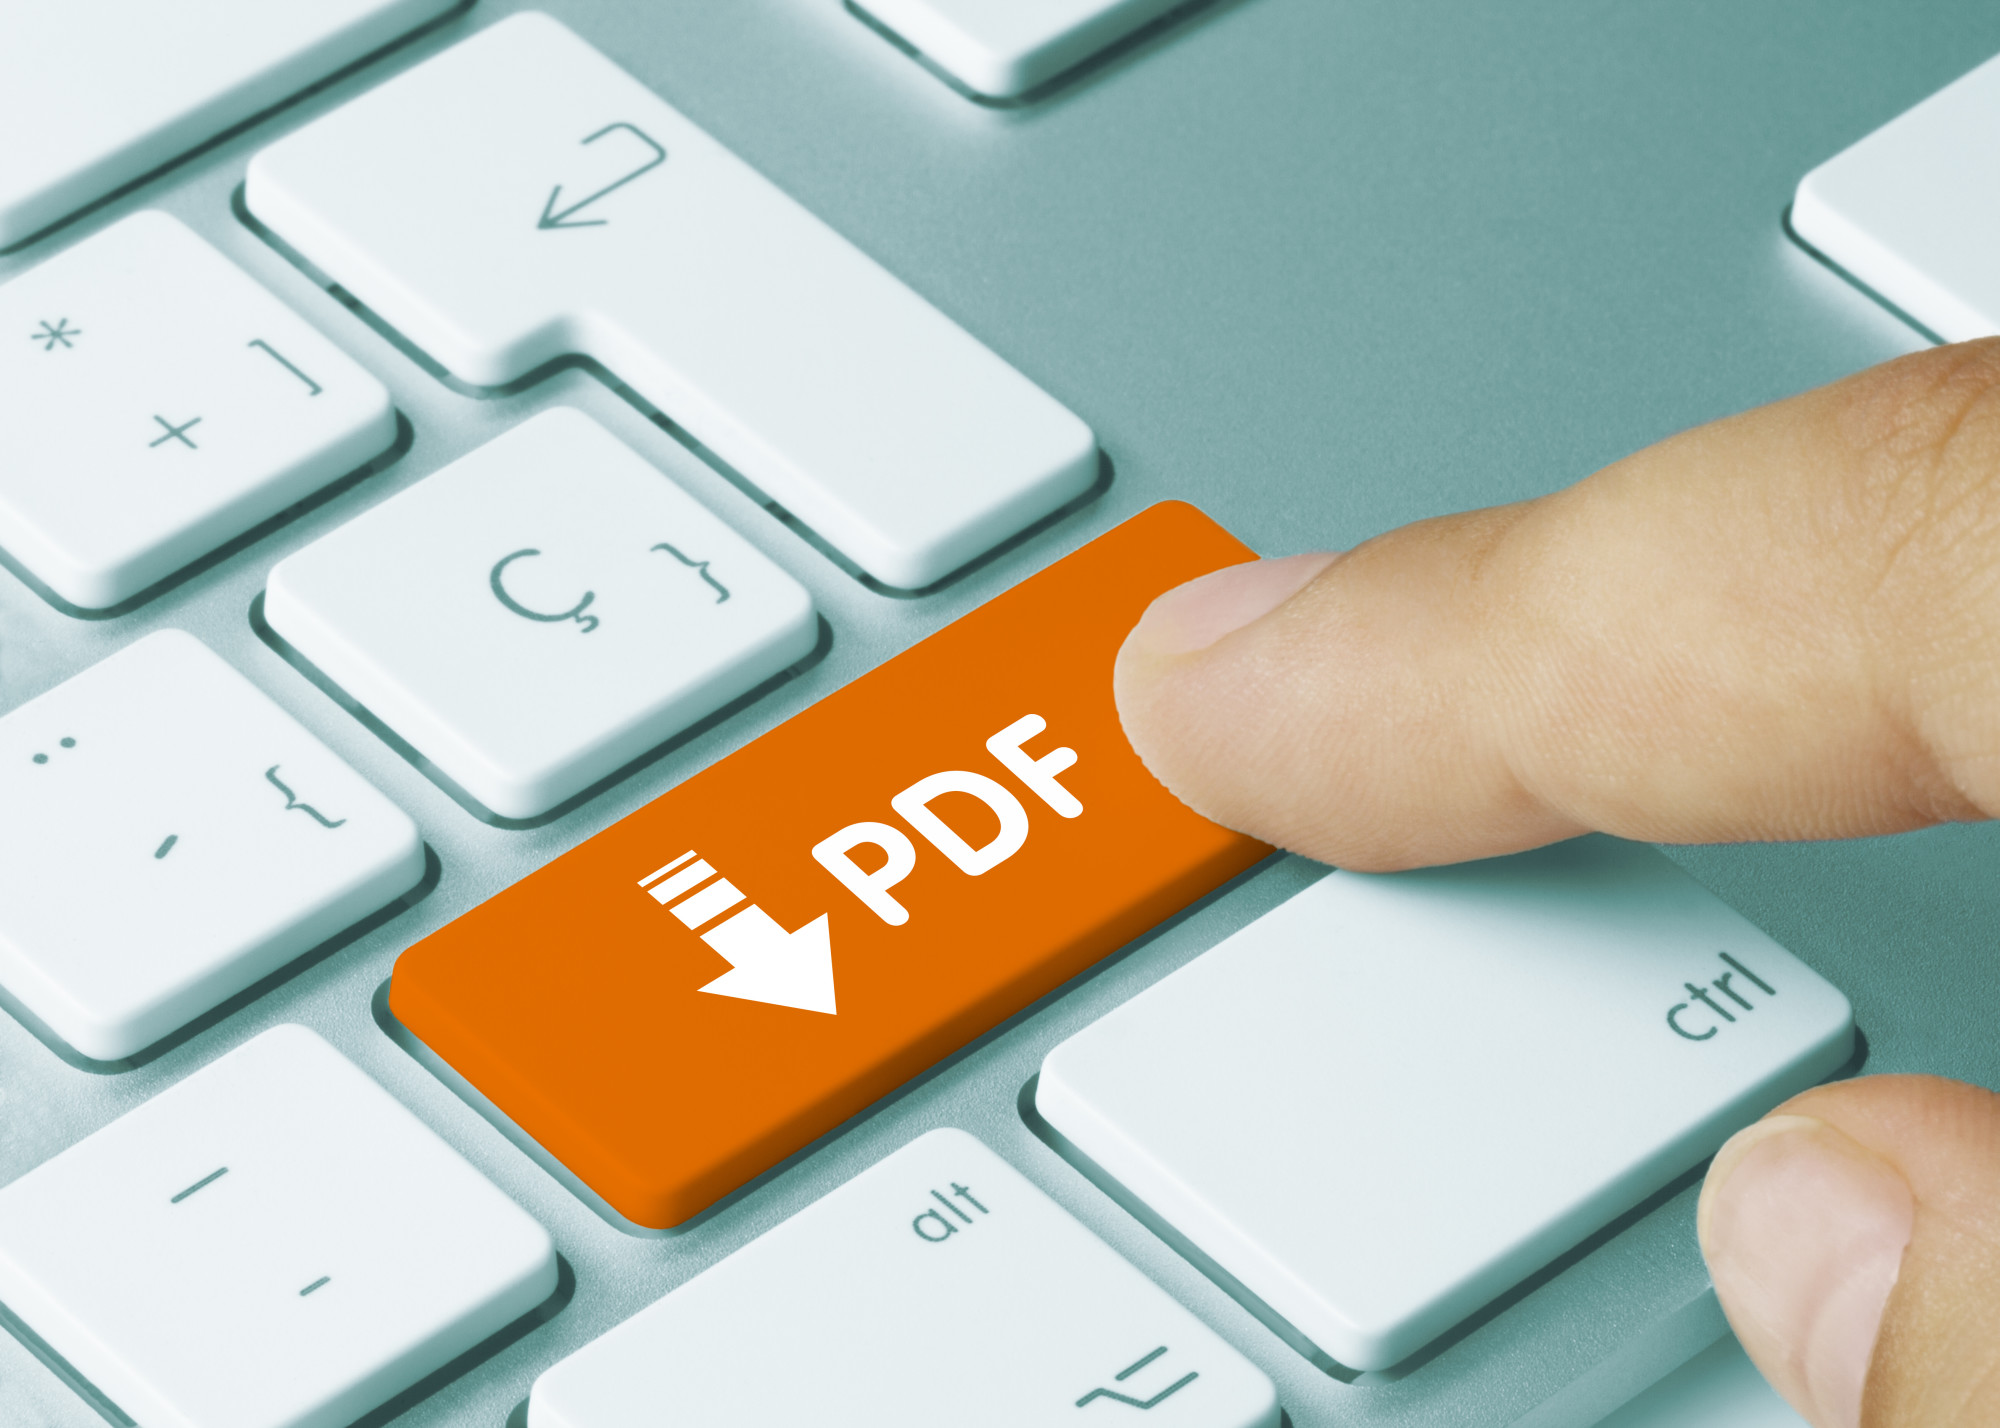 How to Convert Files to PDFs